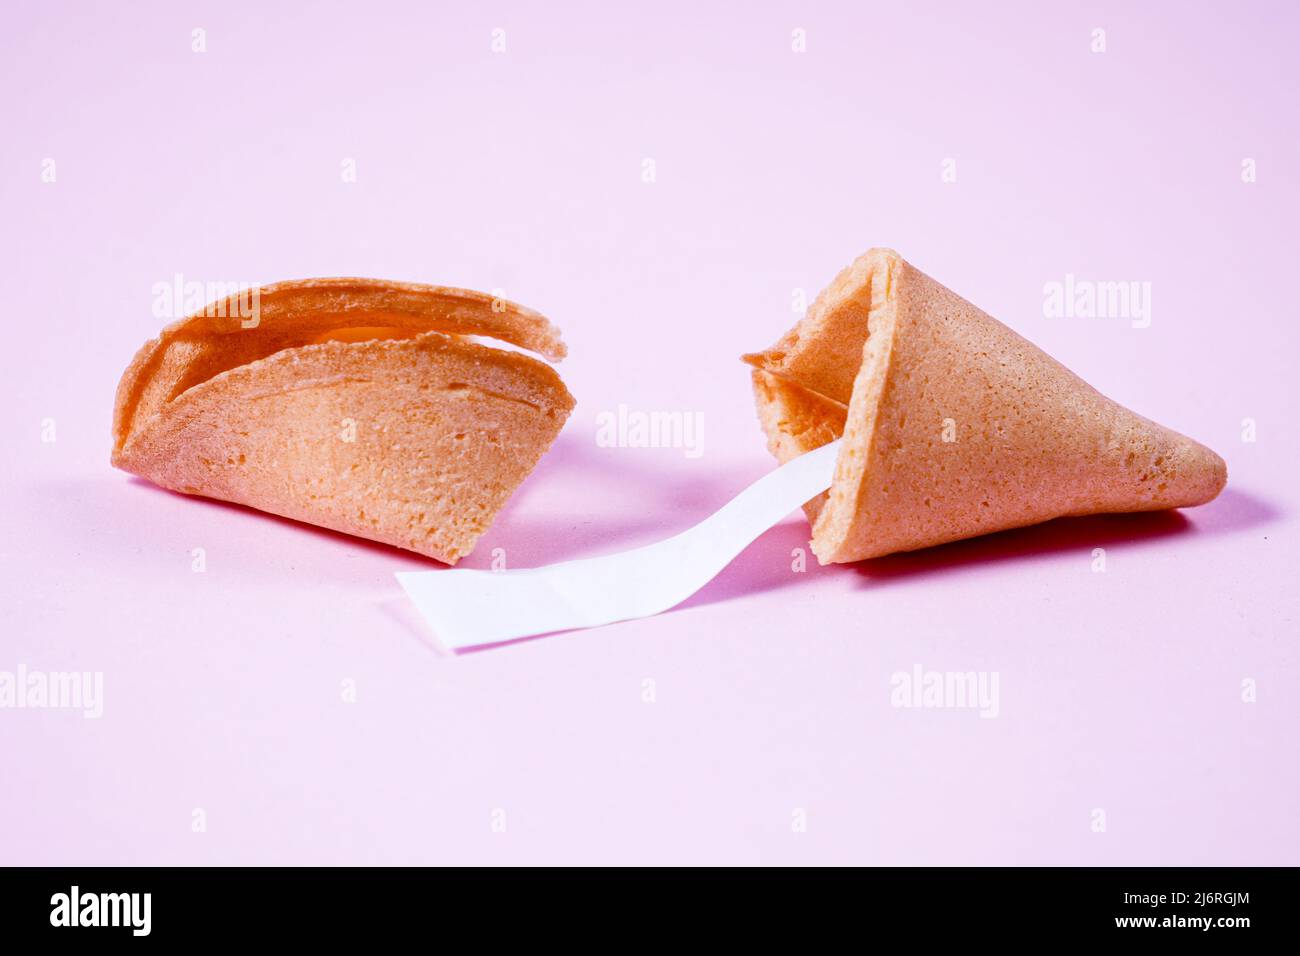 Chinese fortune cookies. Cookies with empty space for prediction words. pink background. Stock Photo